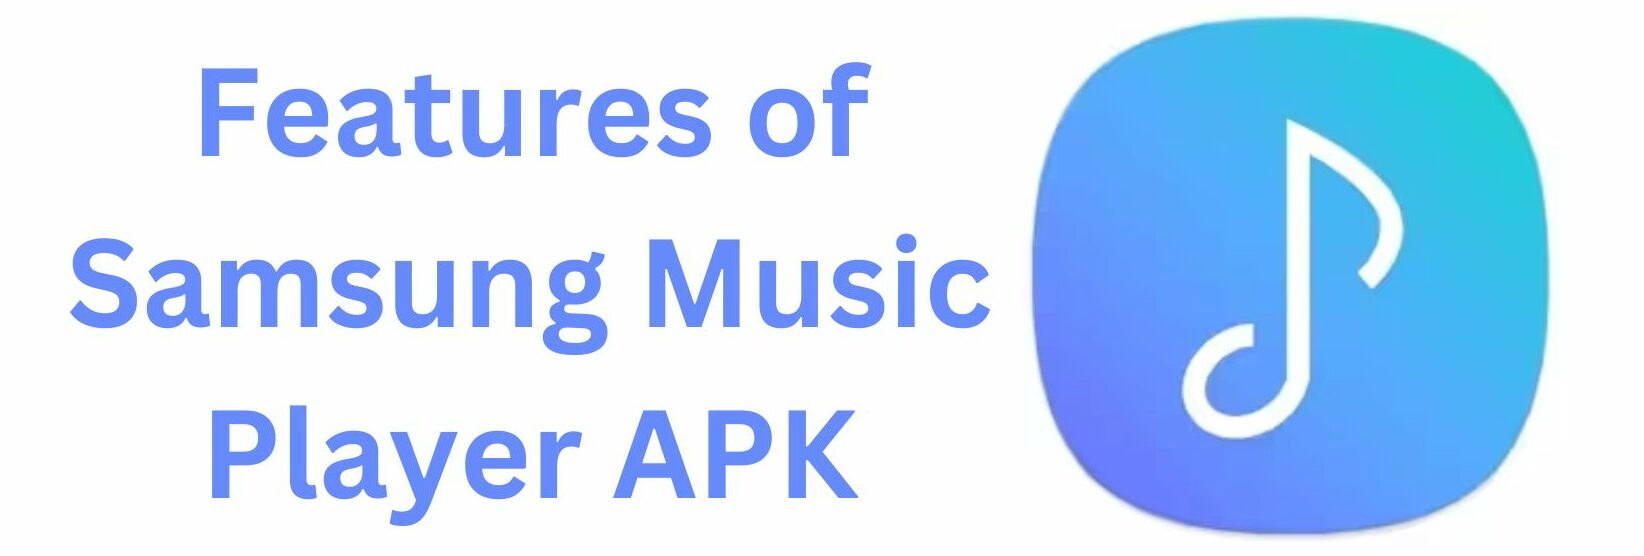 Features of Samsung Music Player APK